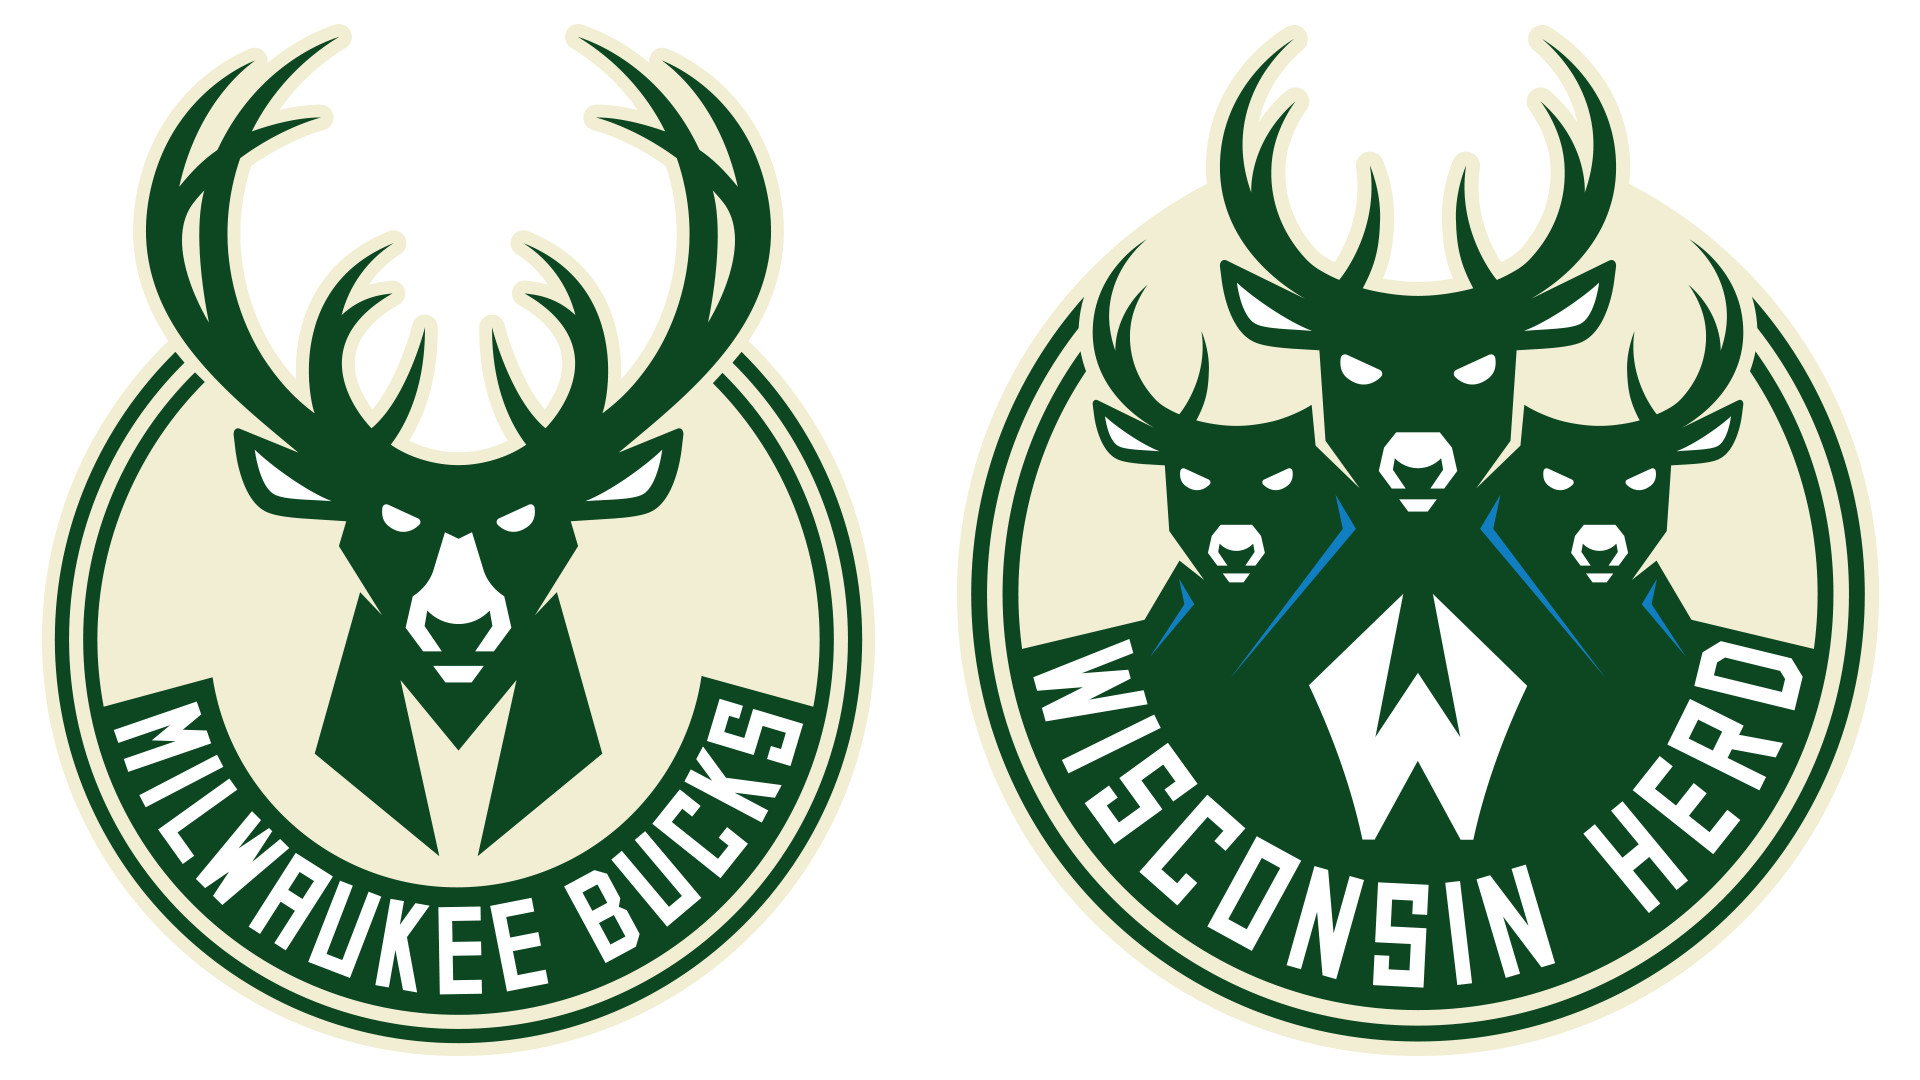 1920x1080 The Wisconsin Herd identity utilizes the visual language of the Milwaukee  Bucks' recently updated brand, illustrating their connection to their  parent club ...